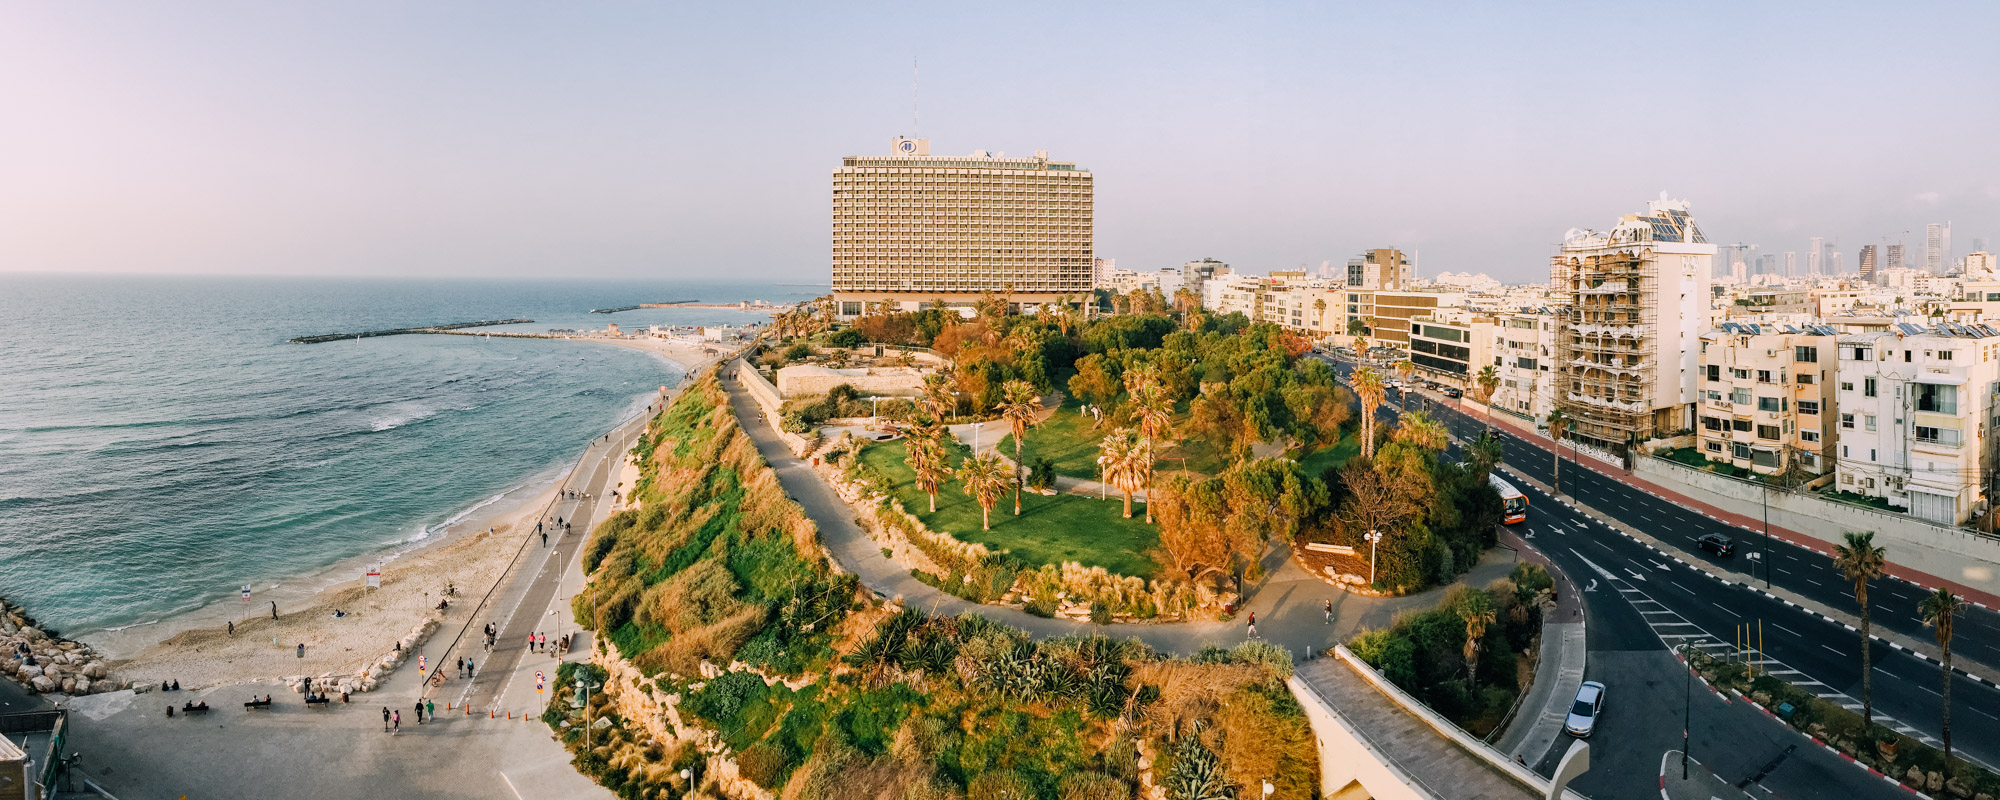 Israël: 5 highlights pour t'en mettre plein la vue — Tel Aviv — Voyage — Jeff On The Road— All photos are under Copyright  © 2019 Jeff Frenette Photography / dezjeff. To use the photos, please contact me at dezjeff@me.com.